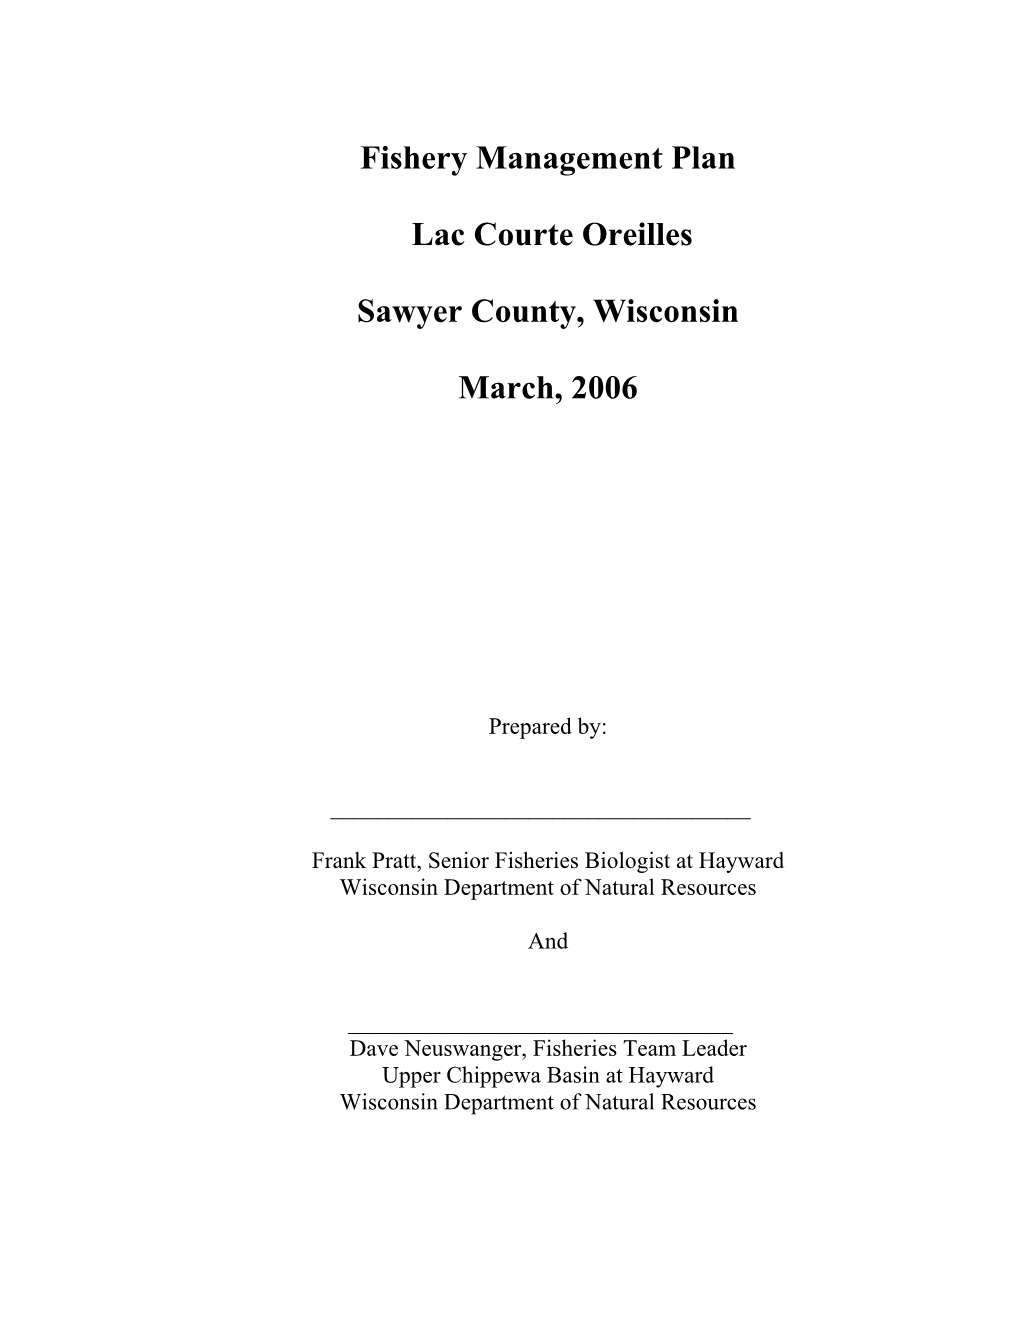 Fishery Management Plan Lac Courte Oreilles Sawyer County, Wisconsin March, 2006